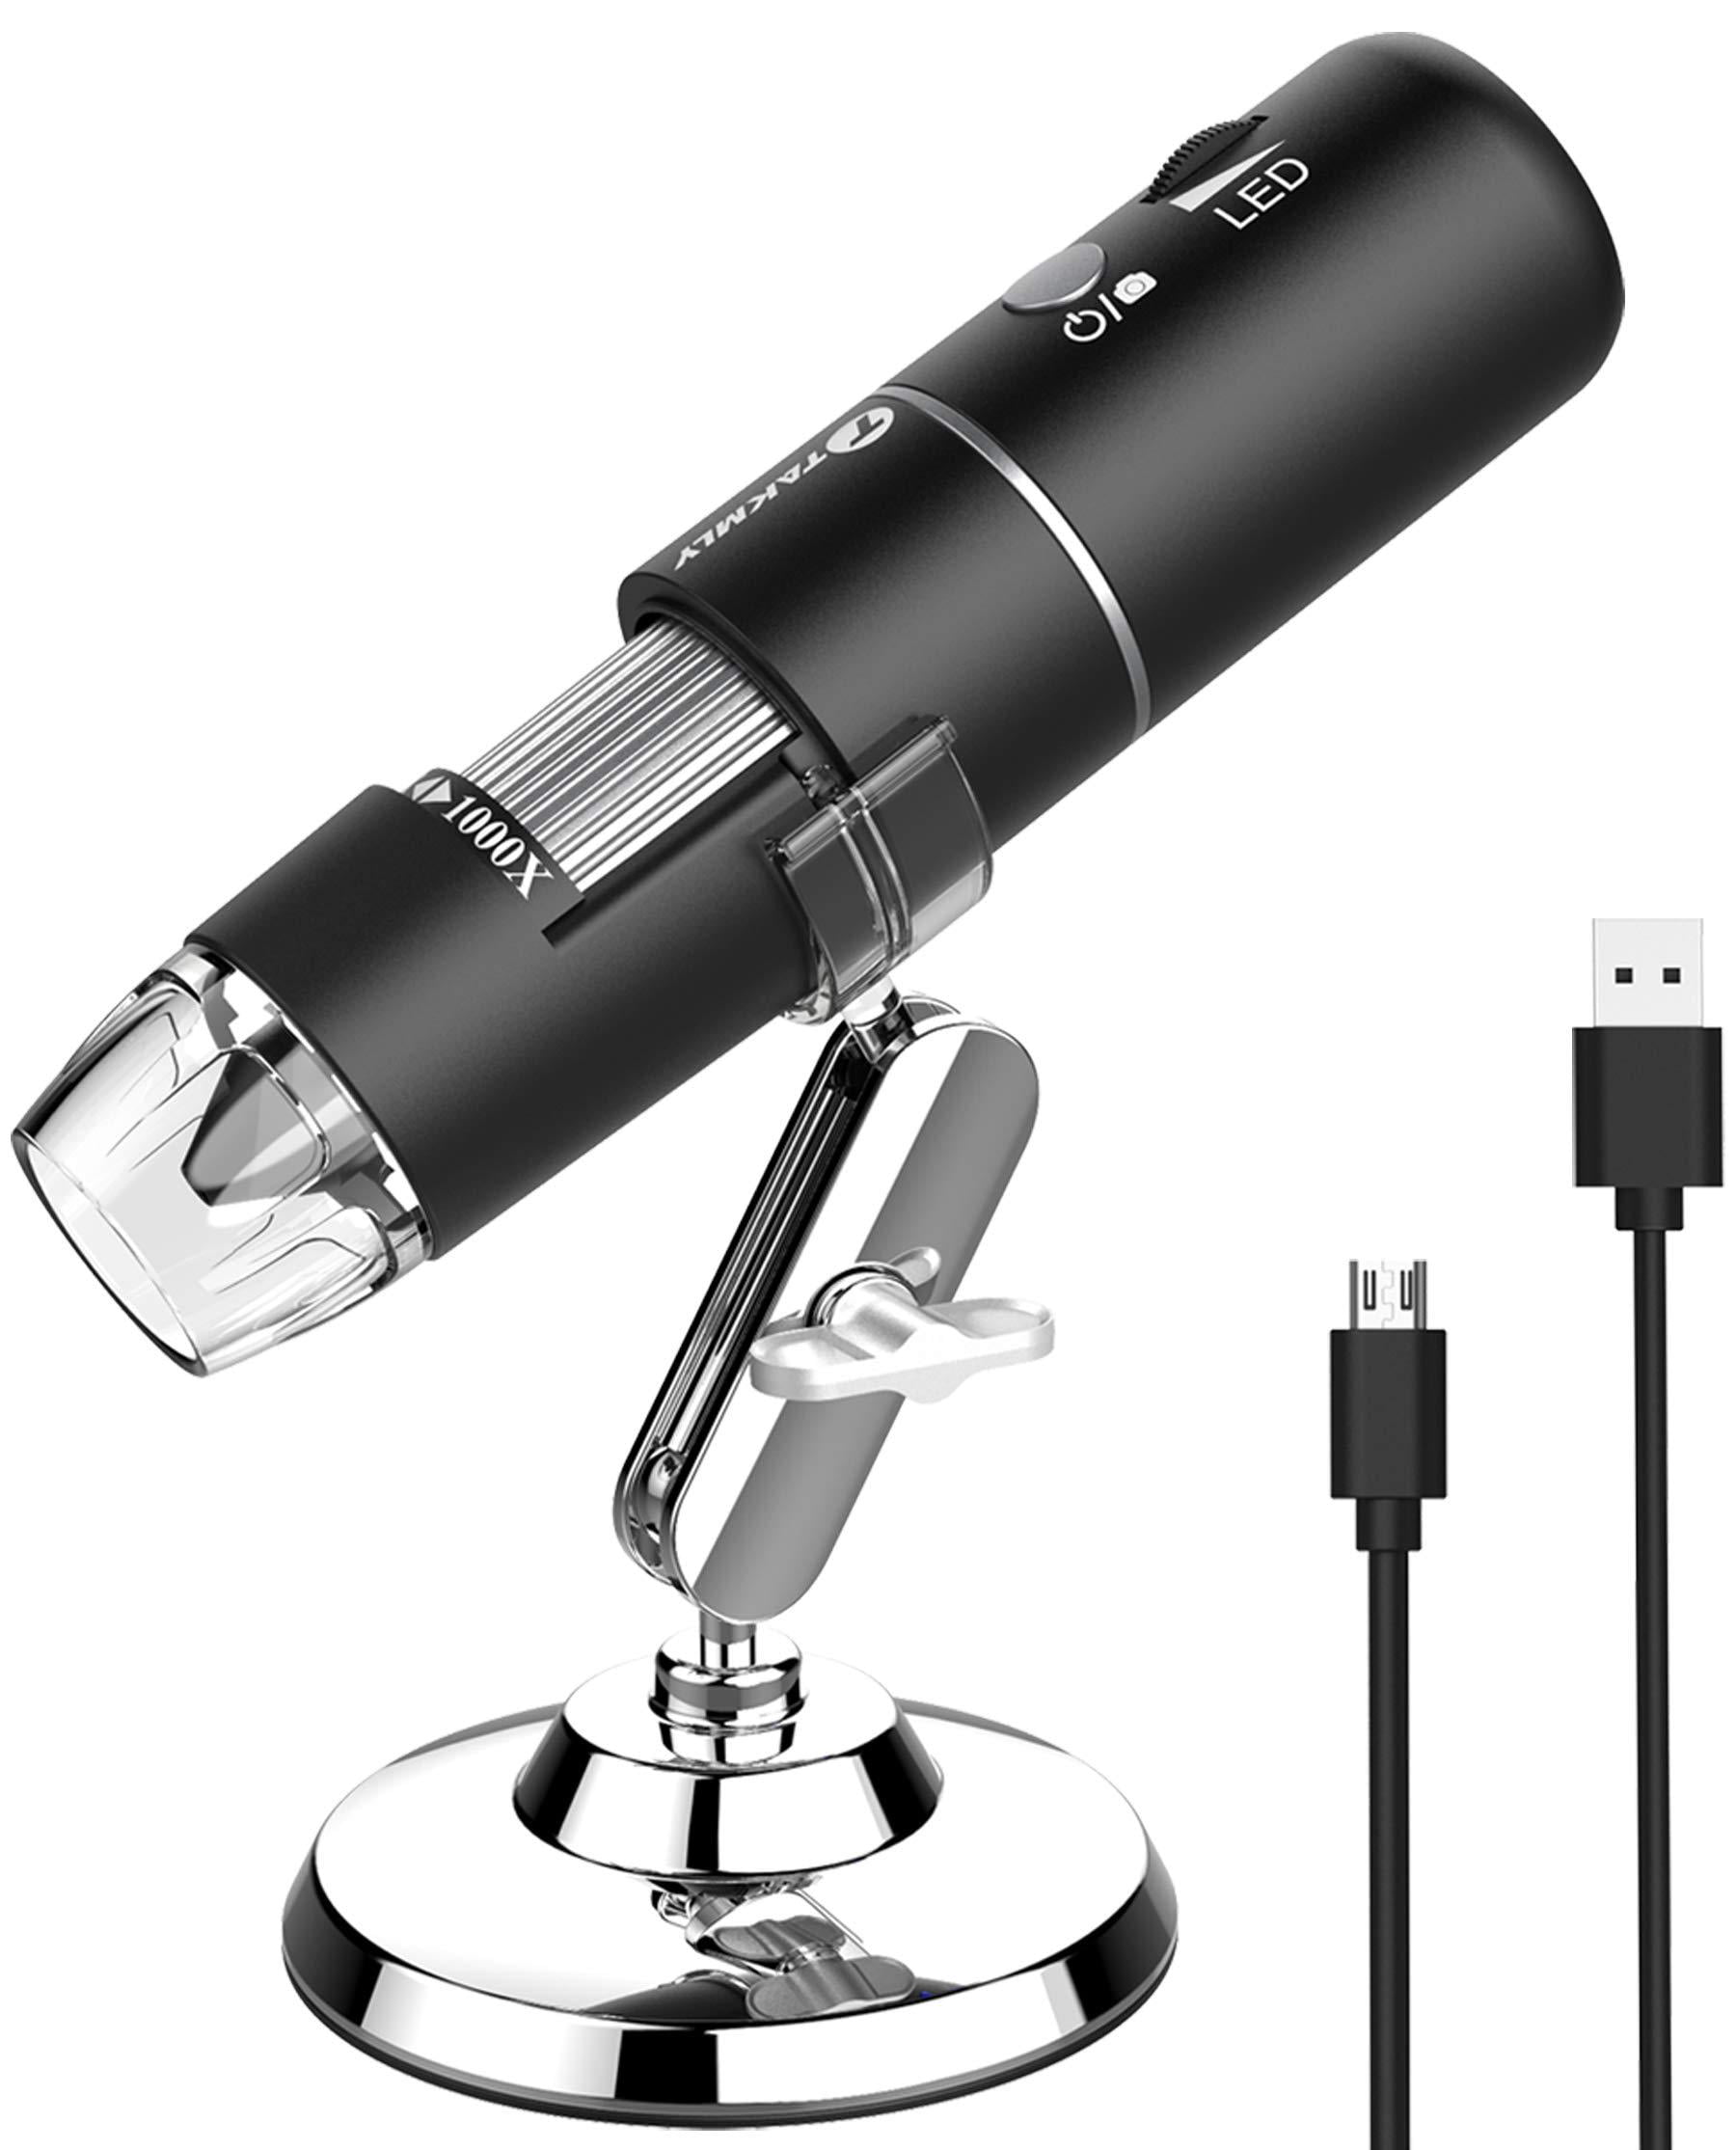 7 Inch 2000X USB Industrial Magnifier Endoscope with HD 1080P Camera APROTII Digital Microscope Support Take Pictures & Video 